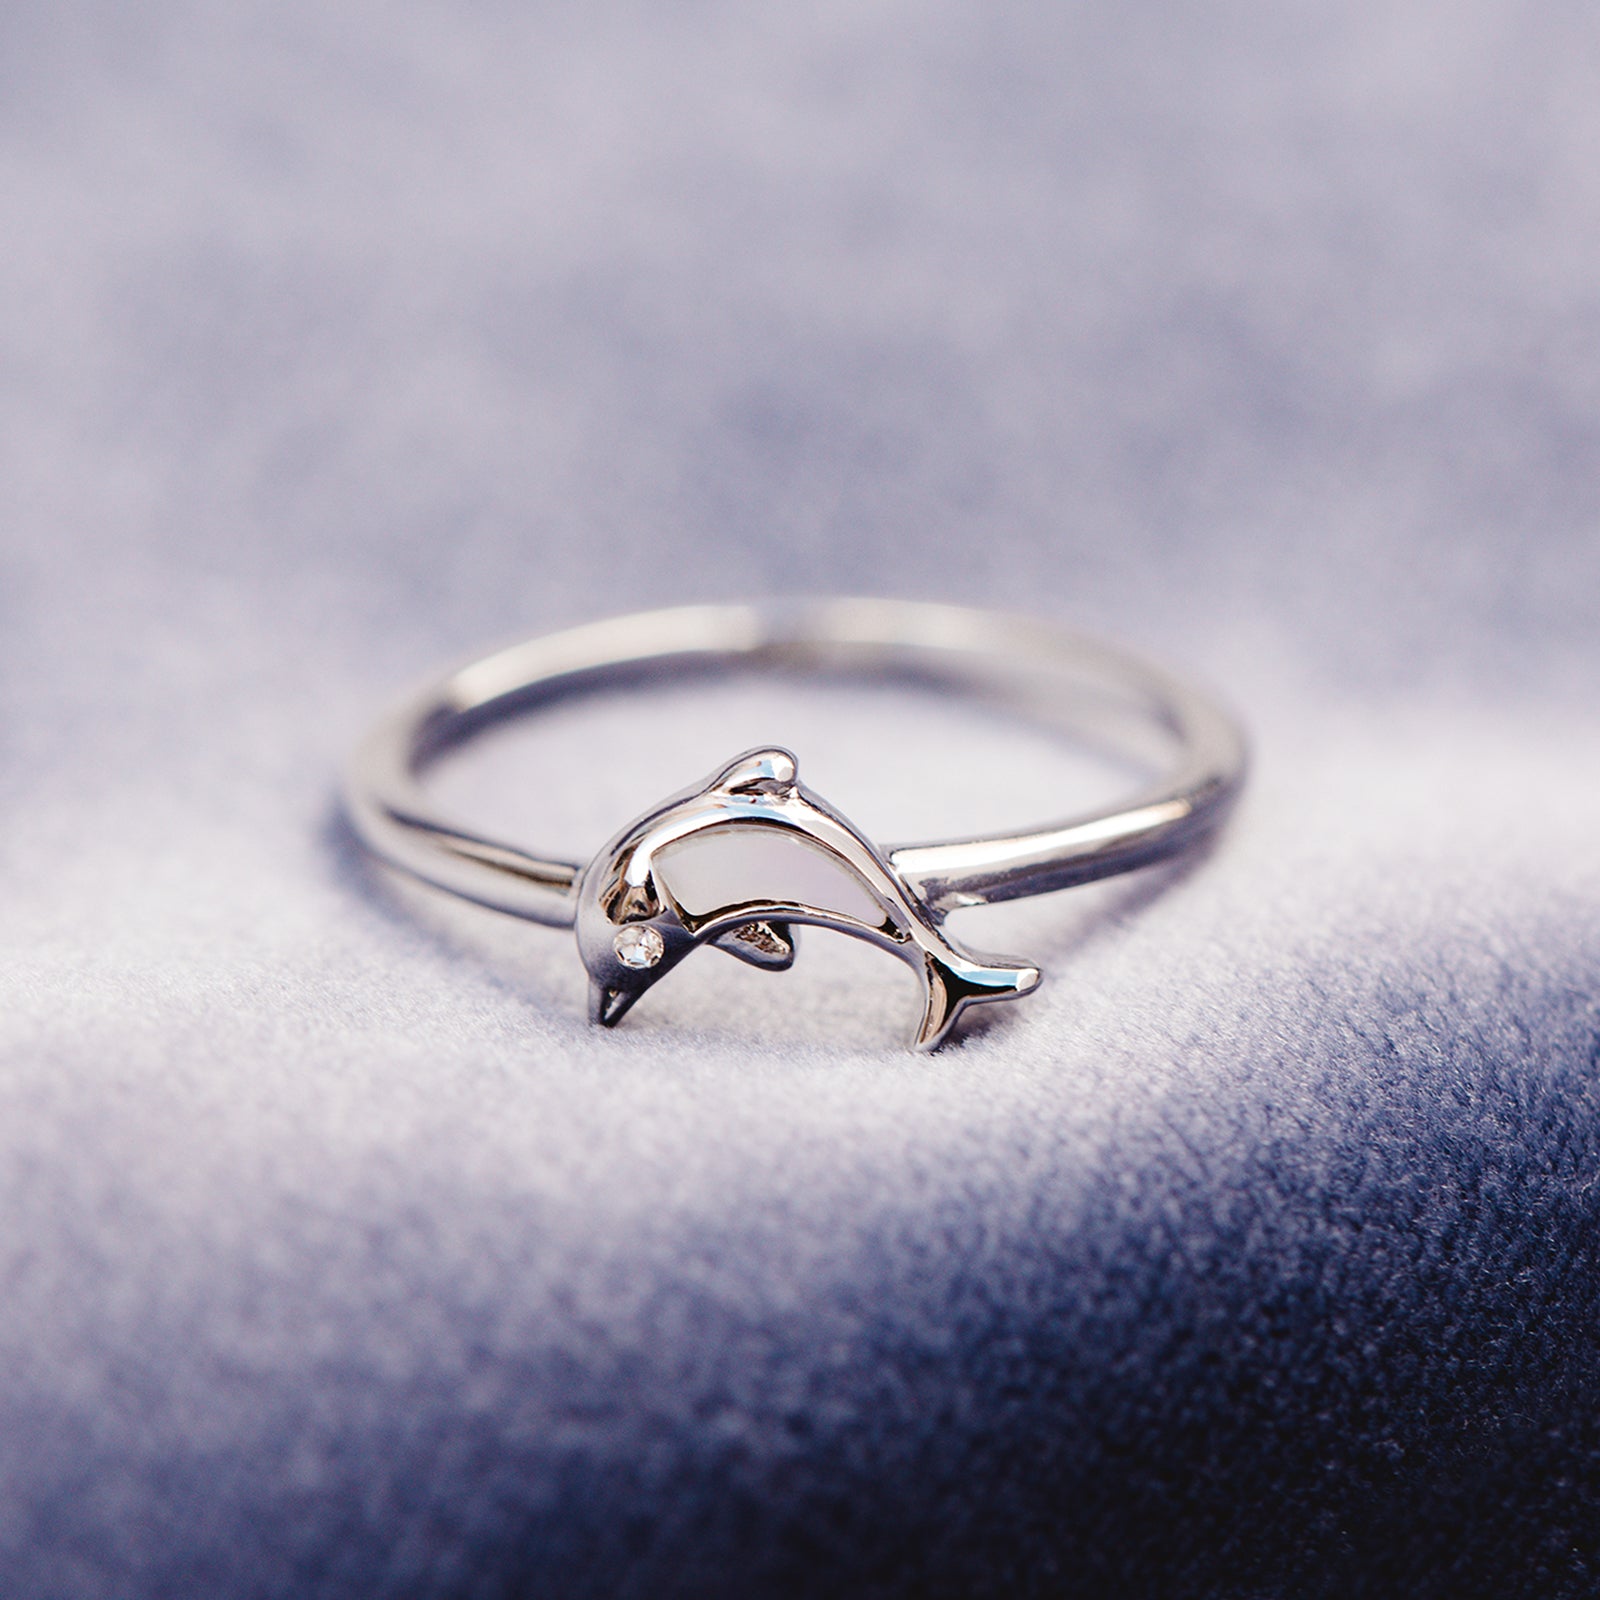 Dolphin - Ring, in 14k gold Ring Size (US) 4 1/2 - (EU) 48